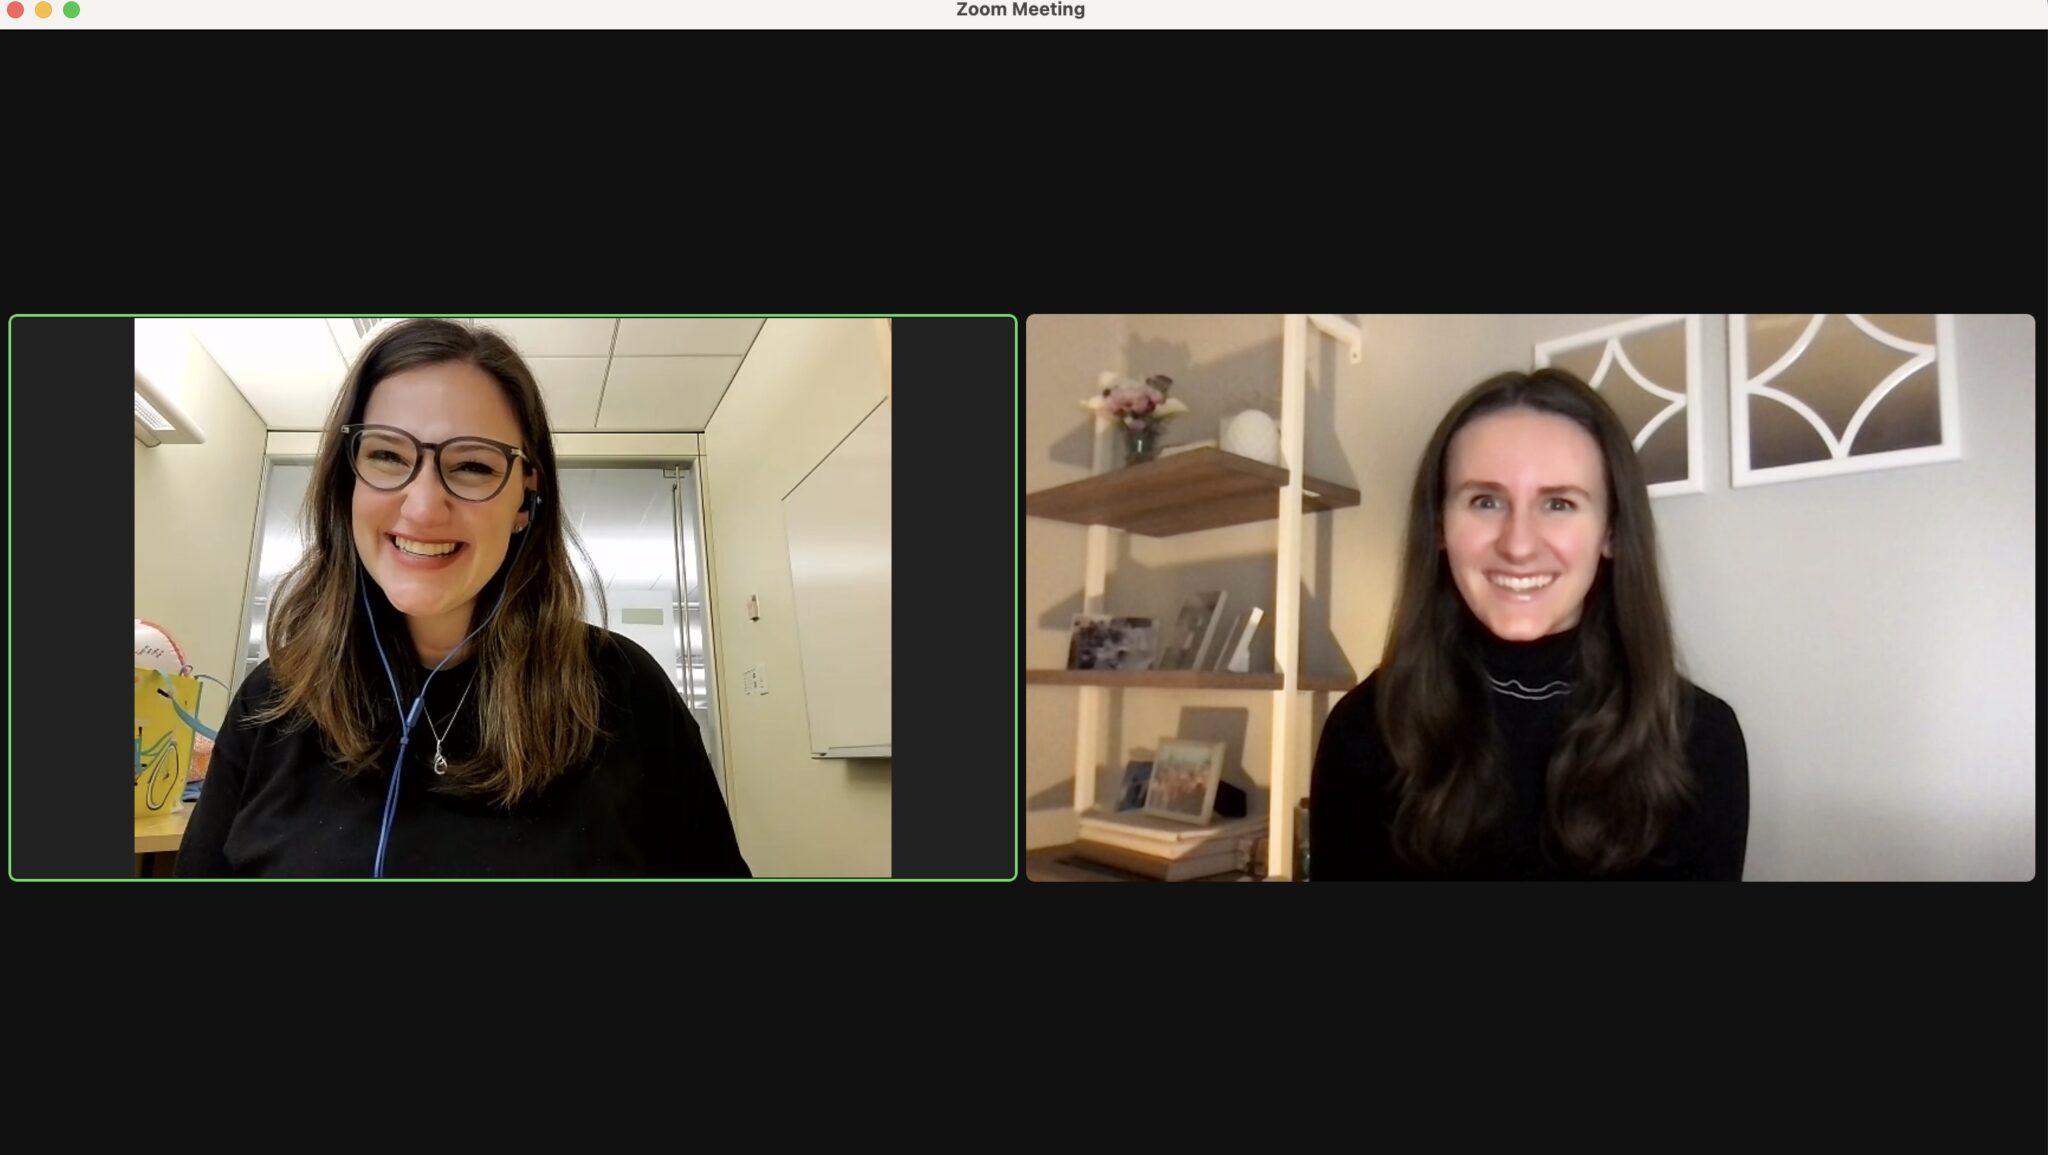 Two women in a Zoom meeting, facilitating a grief support group for young adults